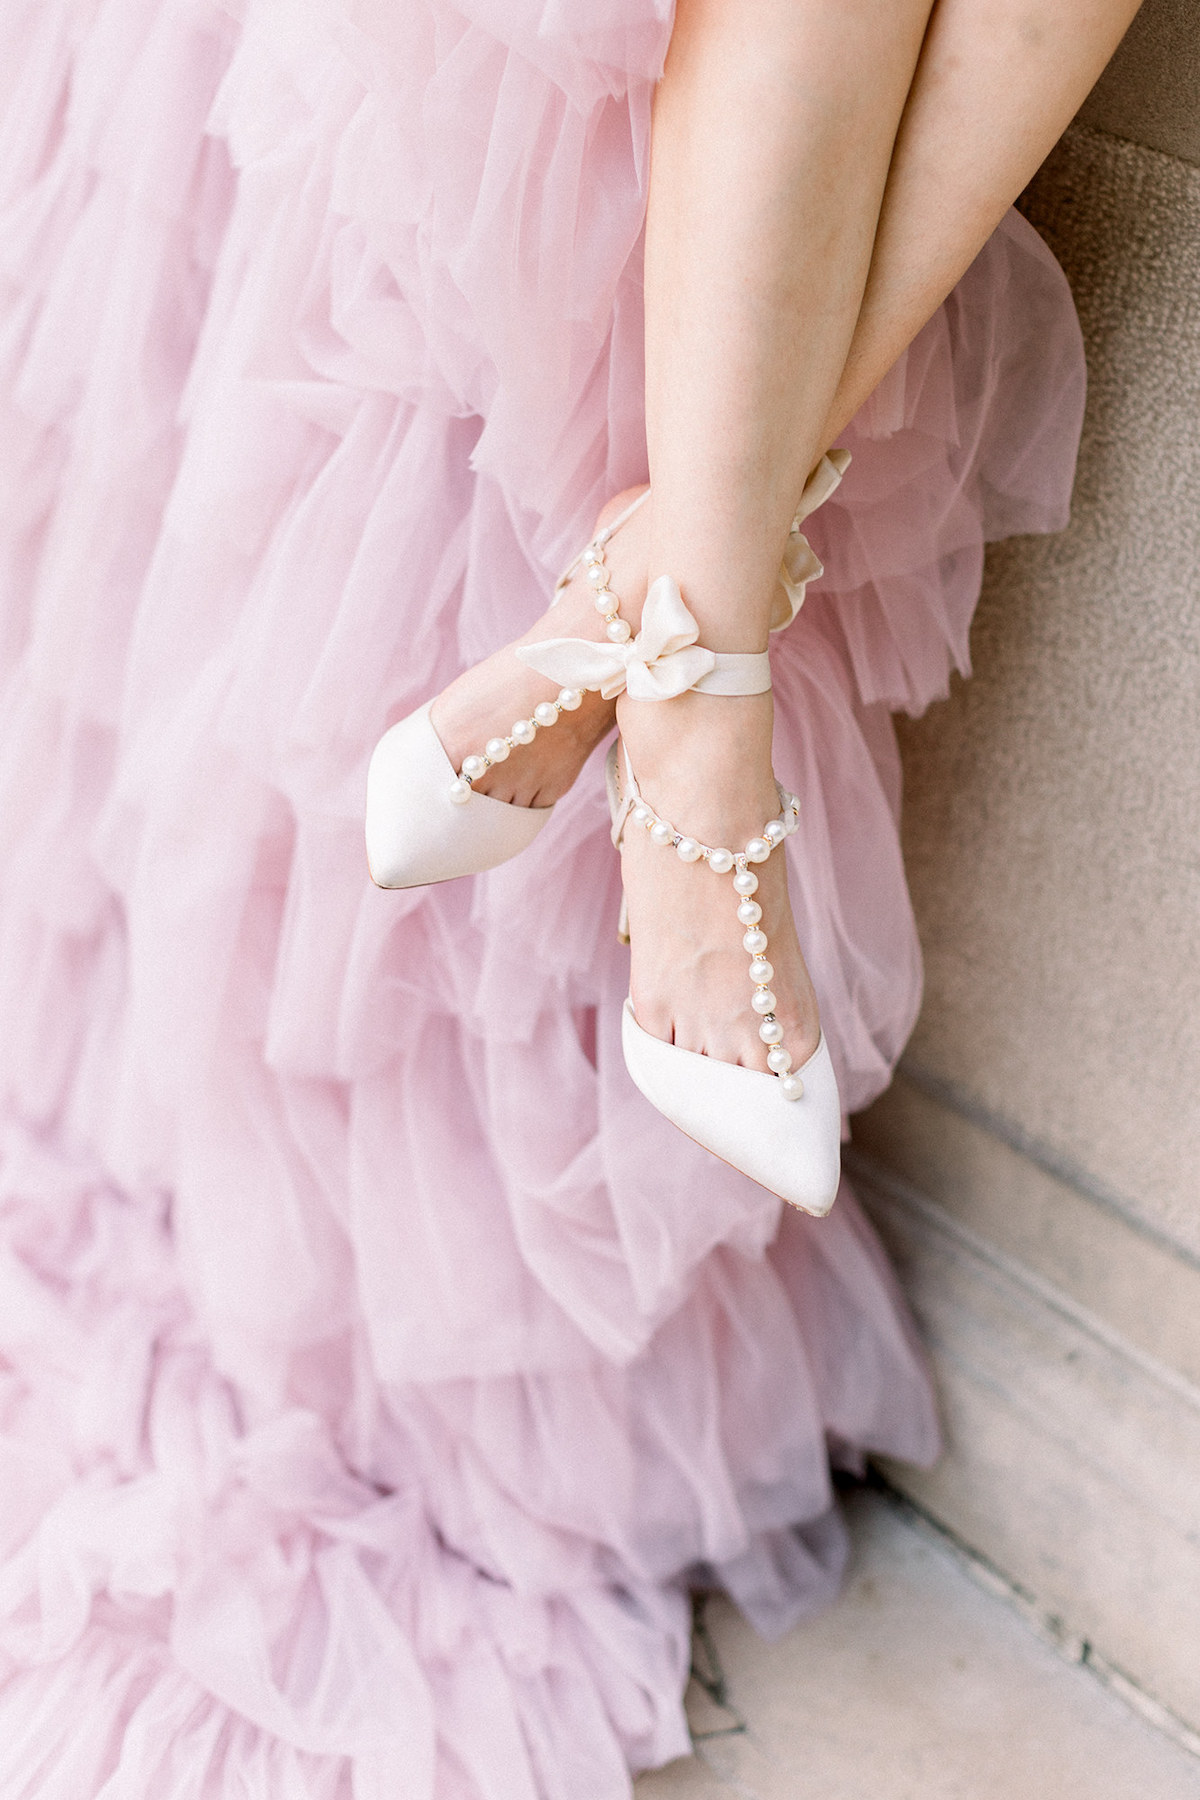 A close-up of Bella Belle shoes adorned with elegant pearl details, adding a touch of timeless sophistication to the bridal ensemble.